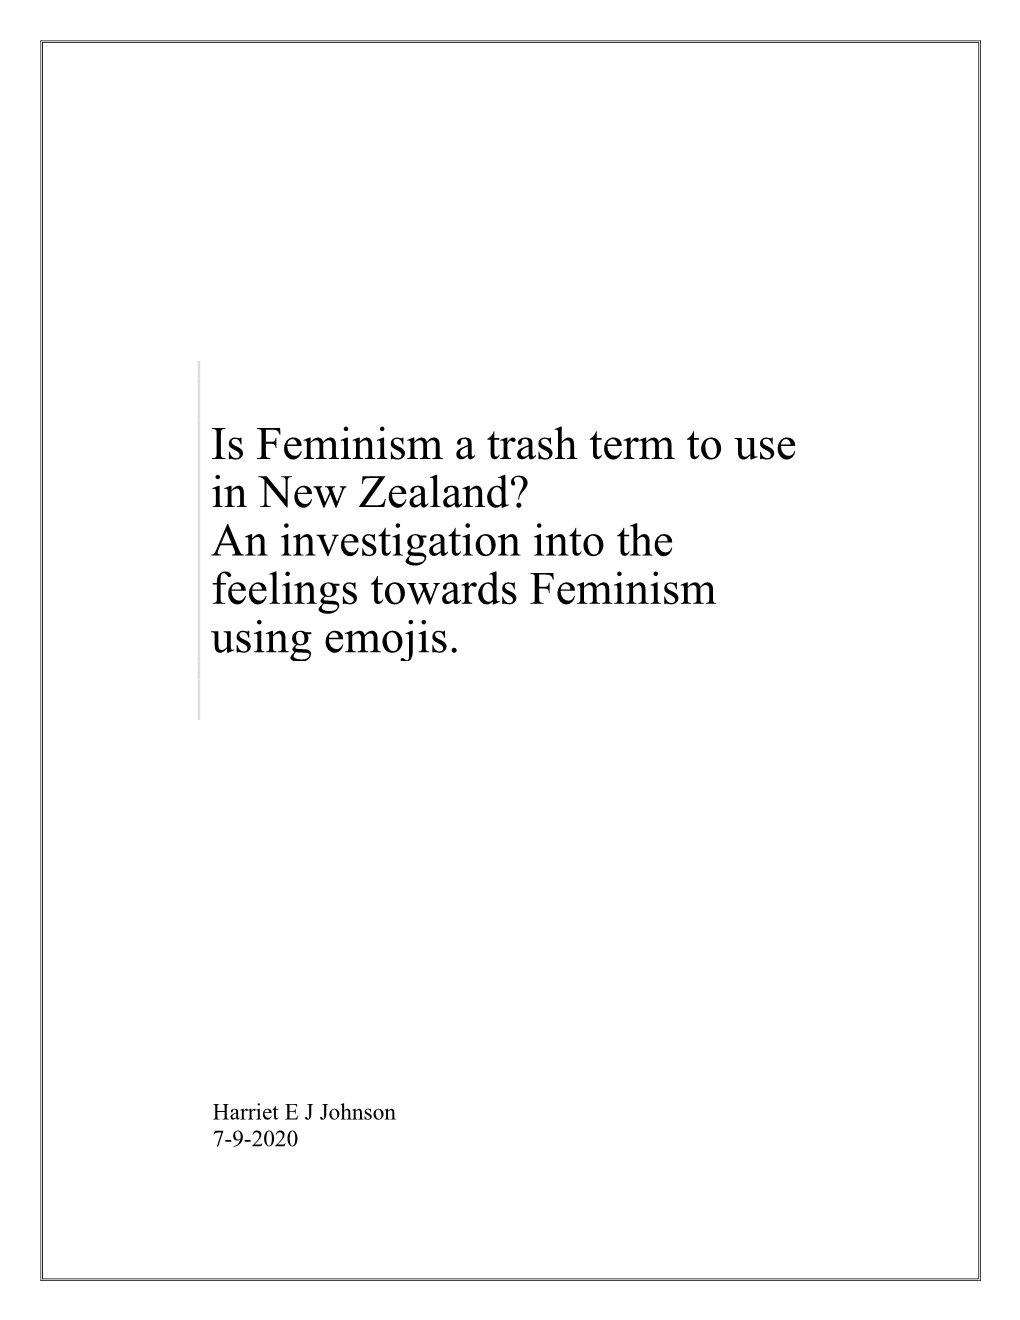 An Investigation Into the Feelings Towards Feminism Using Emojis